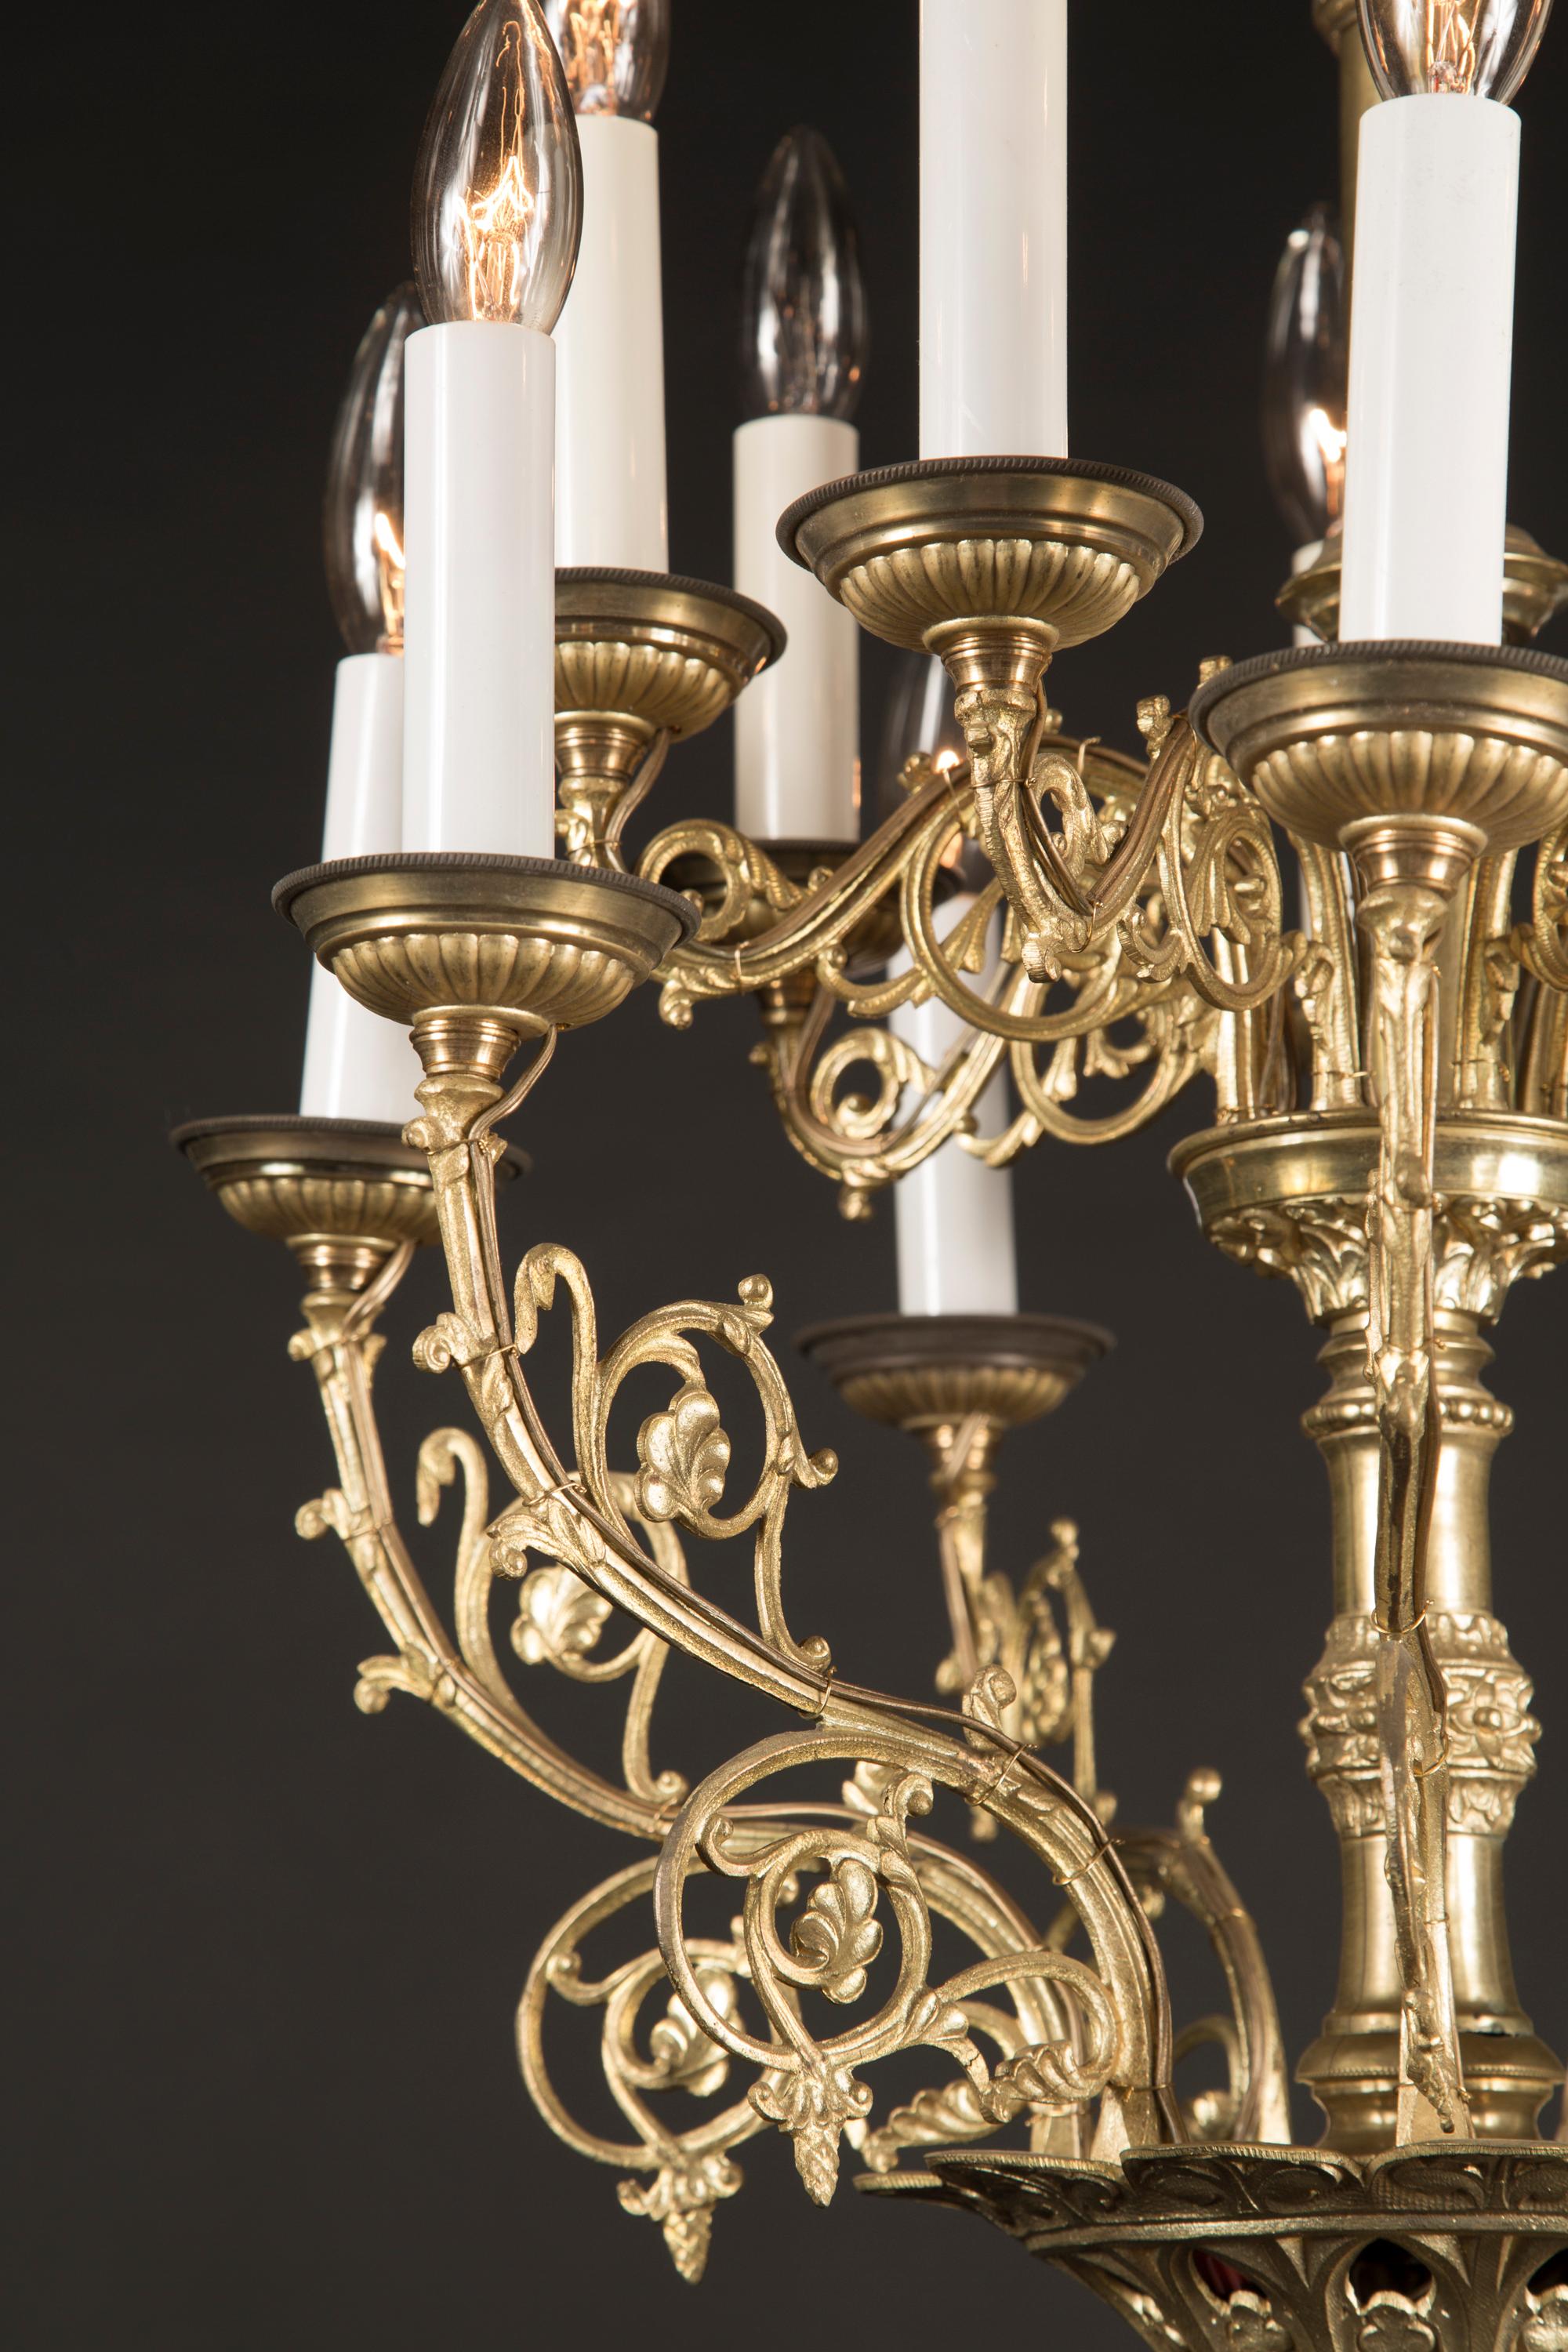 This balanced and glowing mid 20th century chandelier is cast in bronze and features details in plenty. The French fixture sports fluted bronze bobeches on each of the arms, which are separated into two tiers. The arms themselves feature scrolling